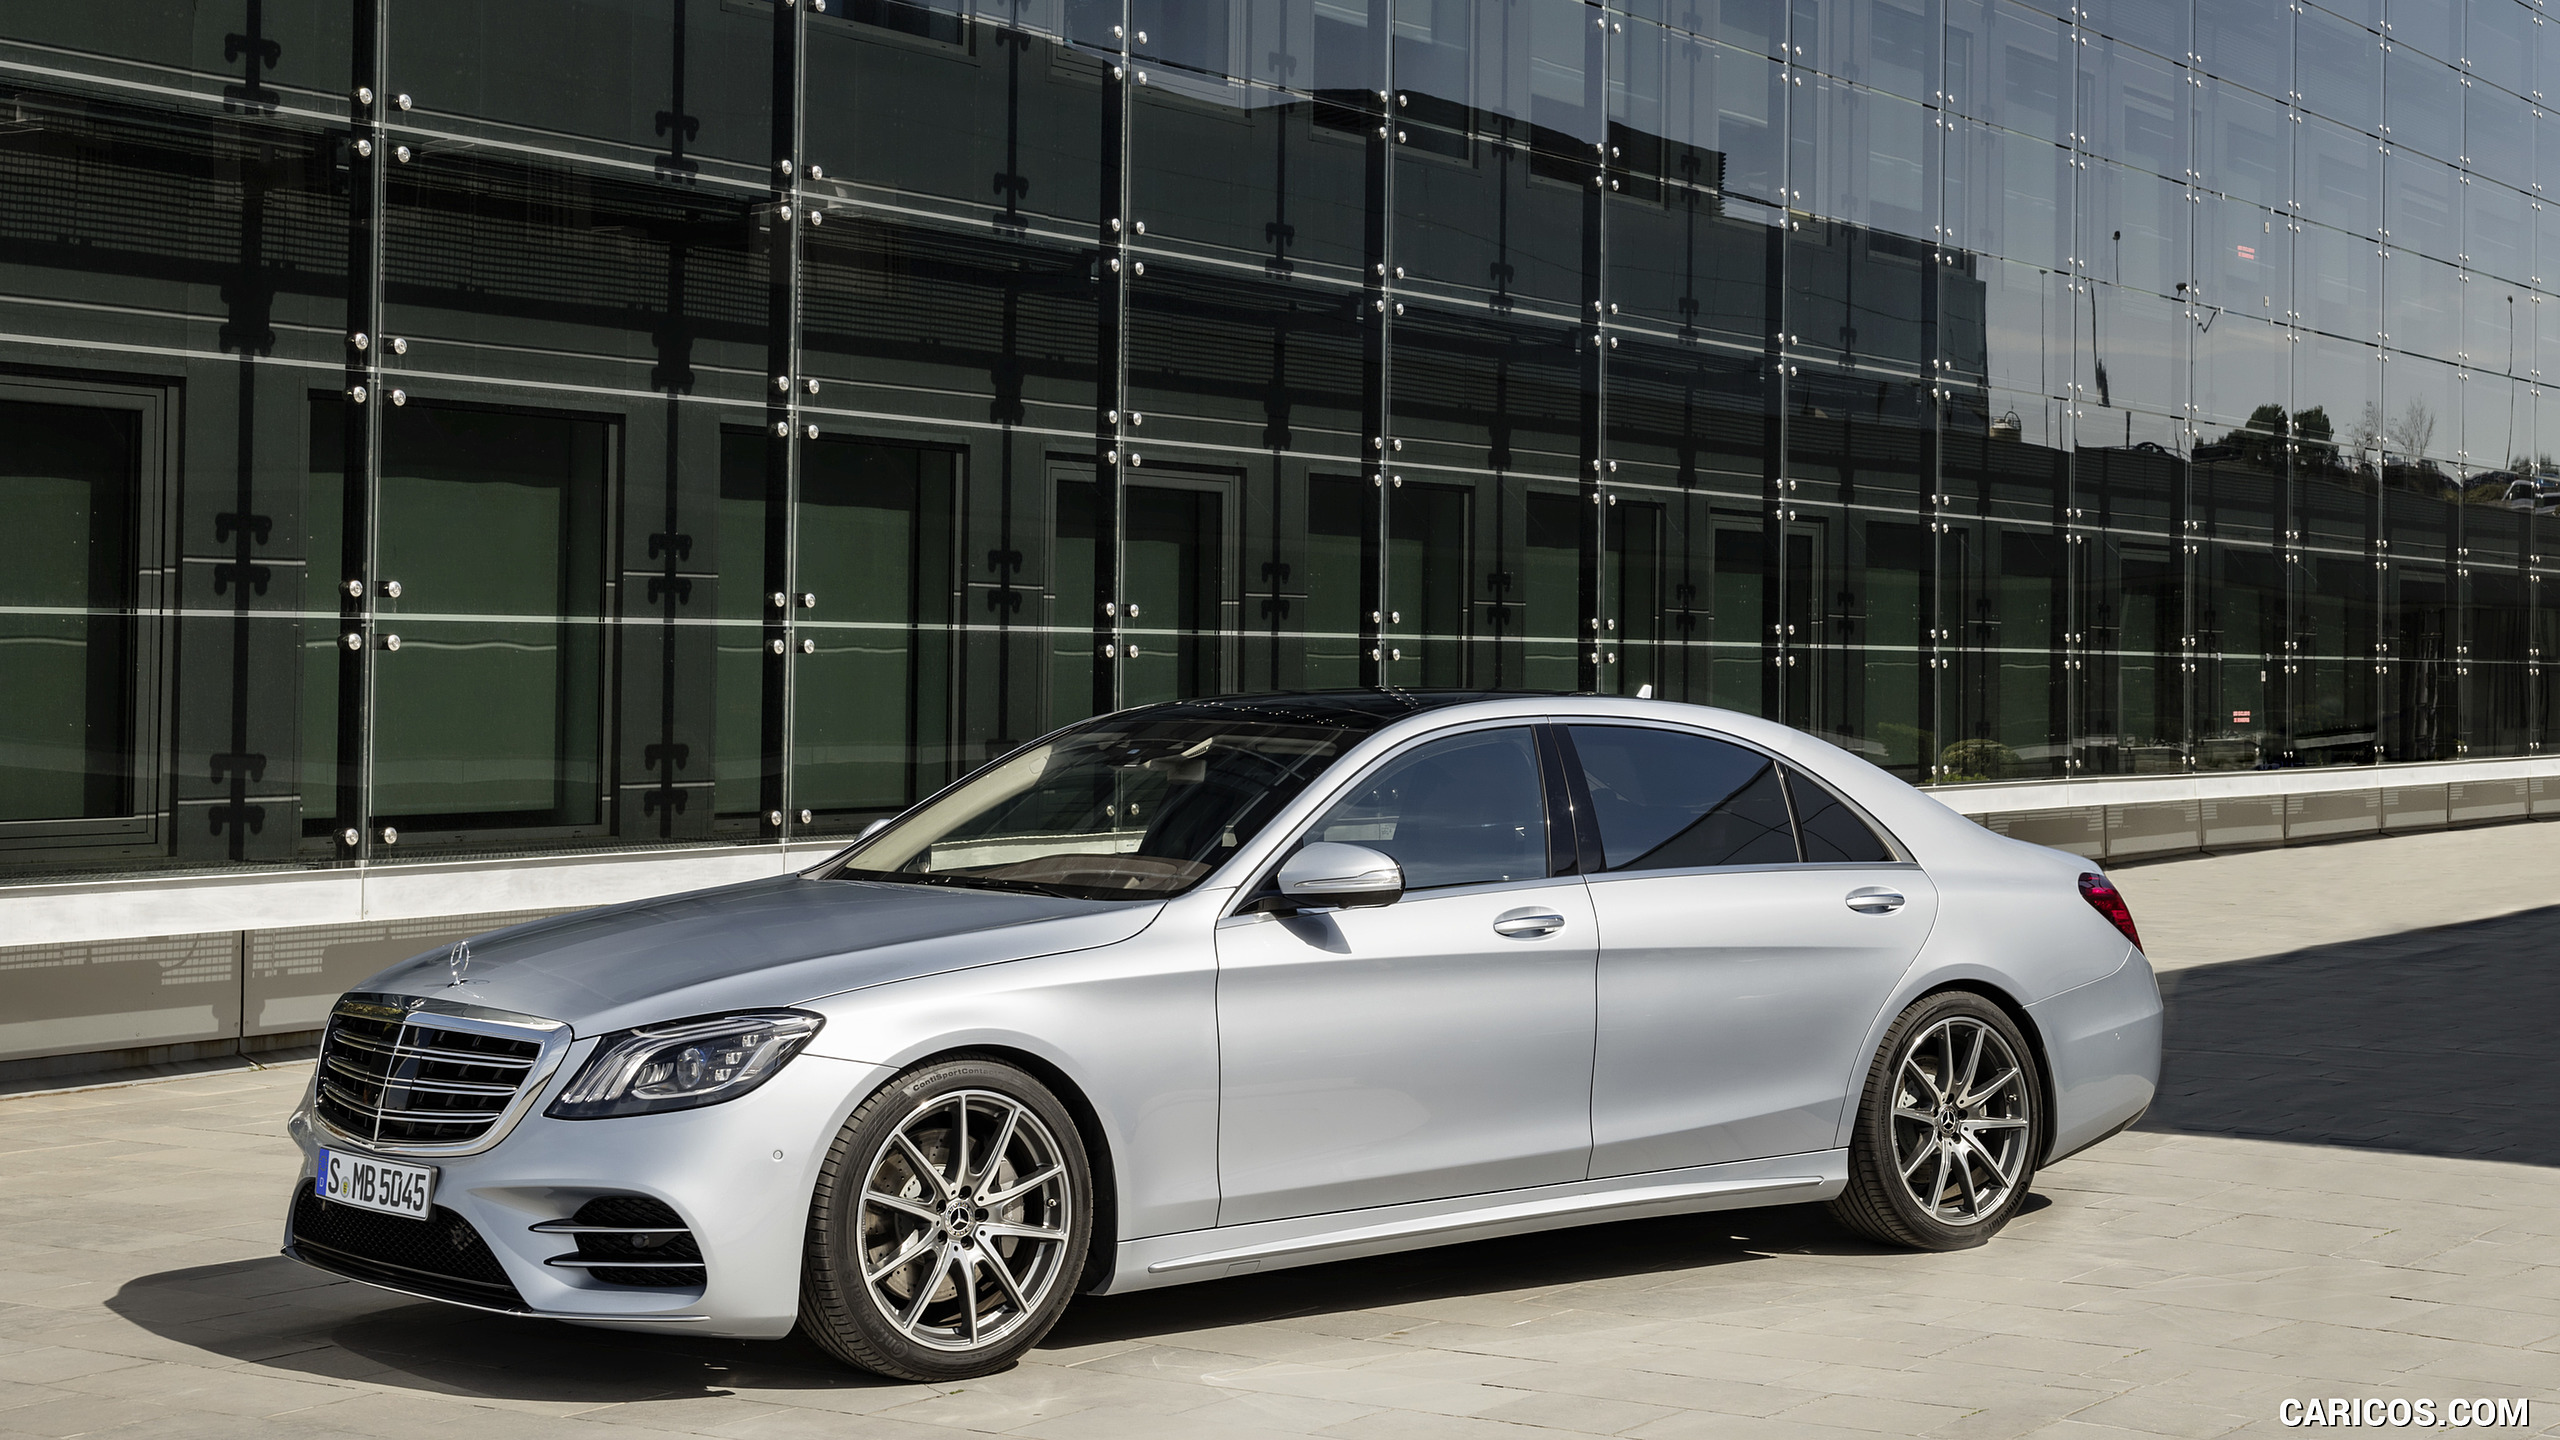 2018 Mercedes-Benz S-Class AMG Line LWB (Color: Diamond Silver), #4 of 156